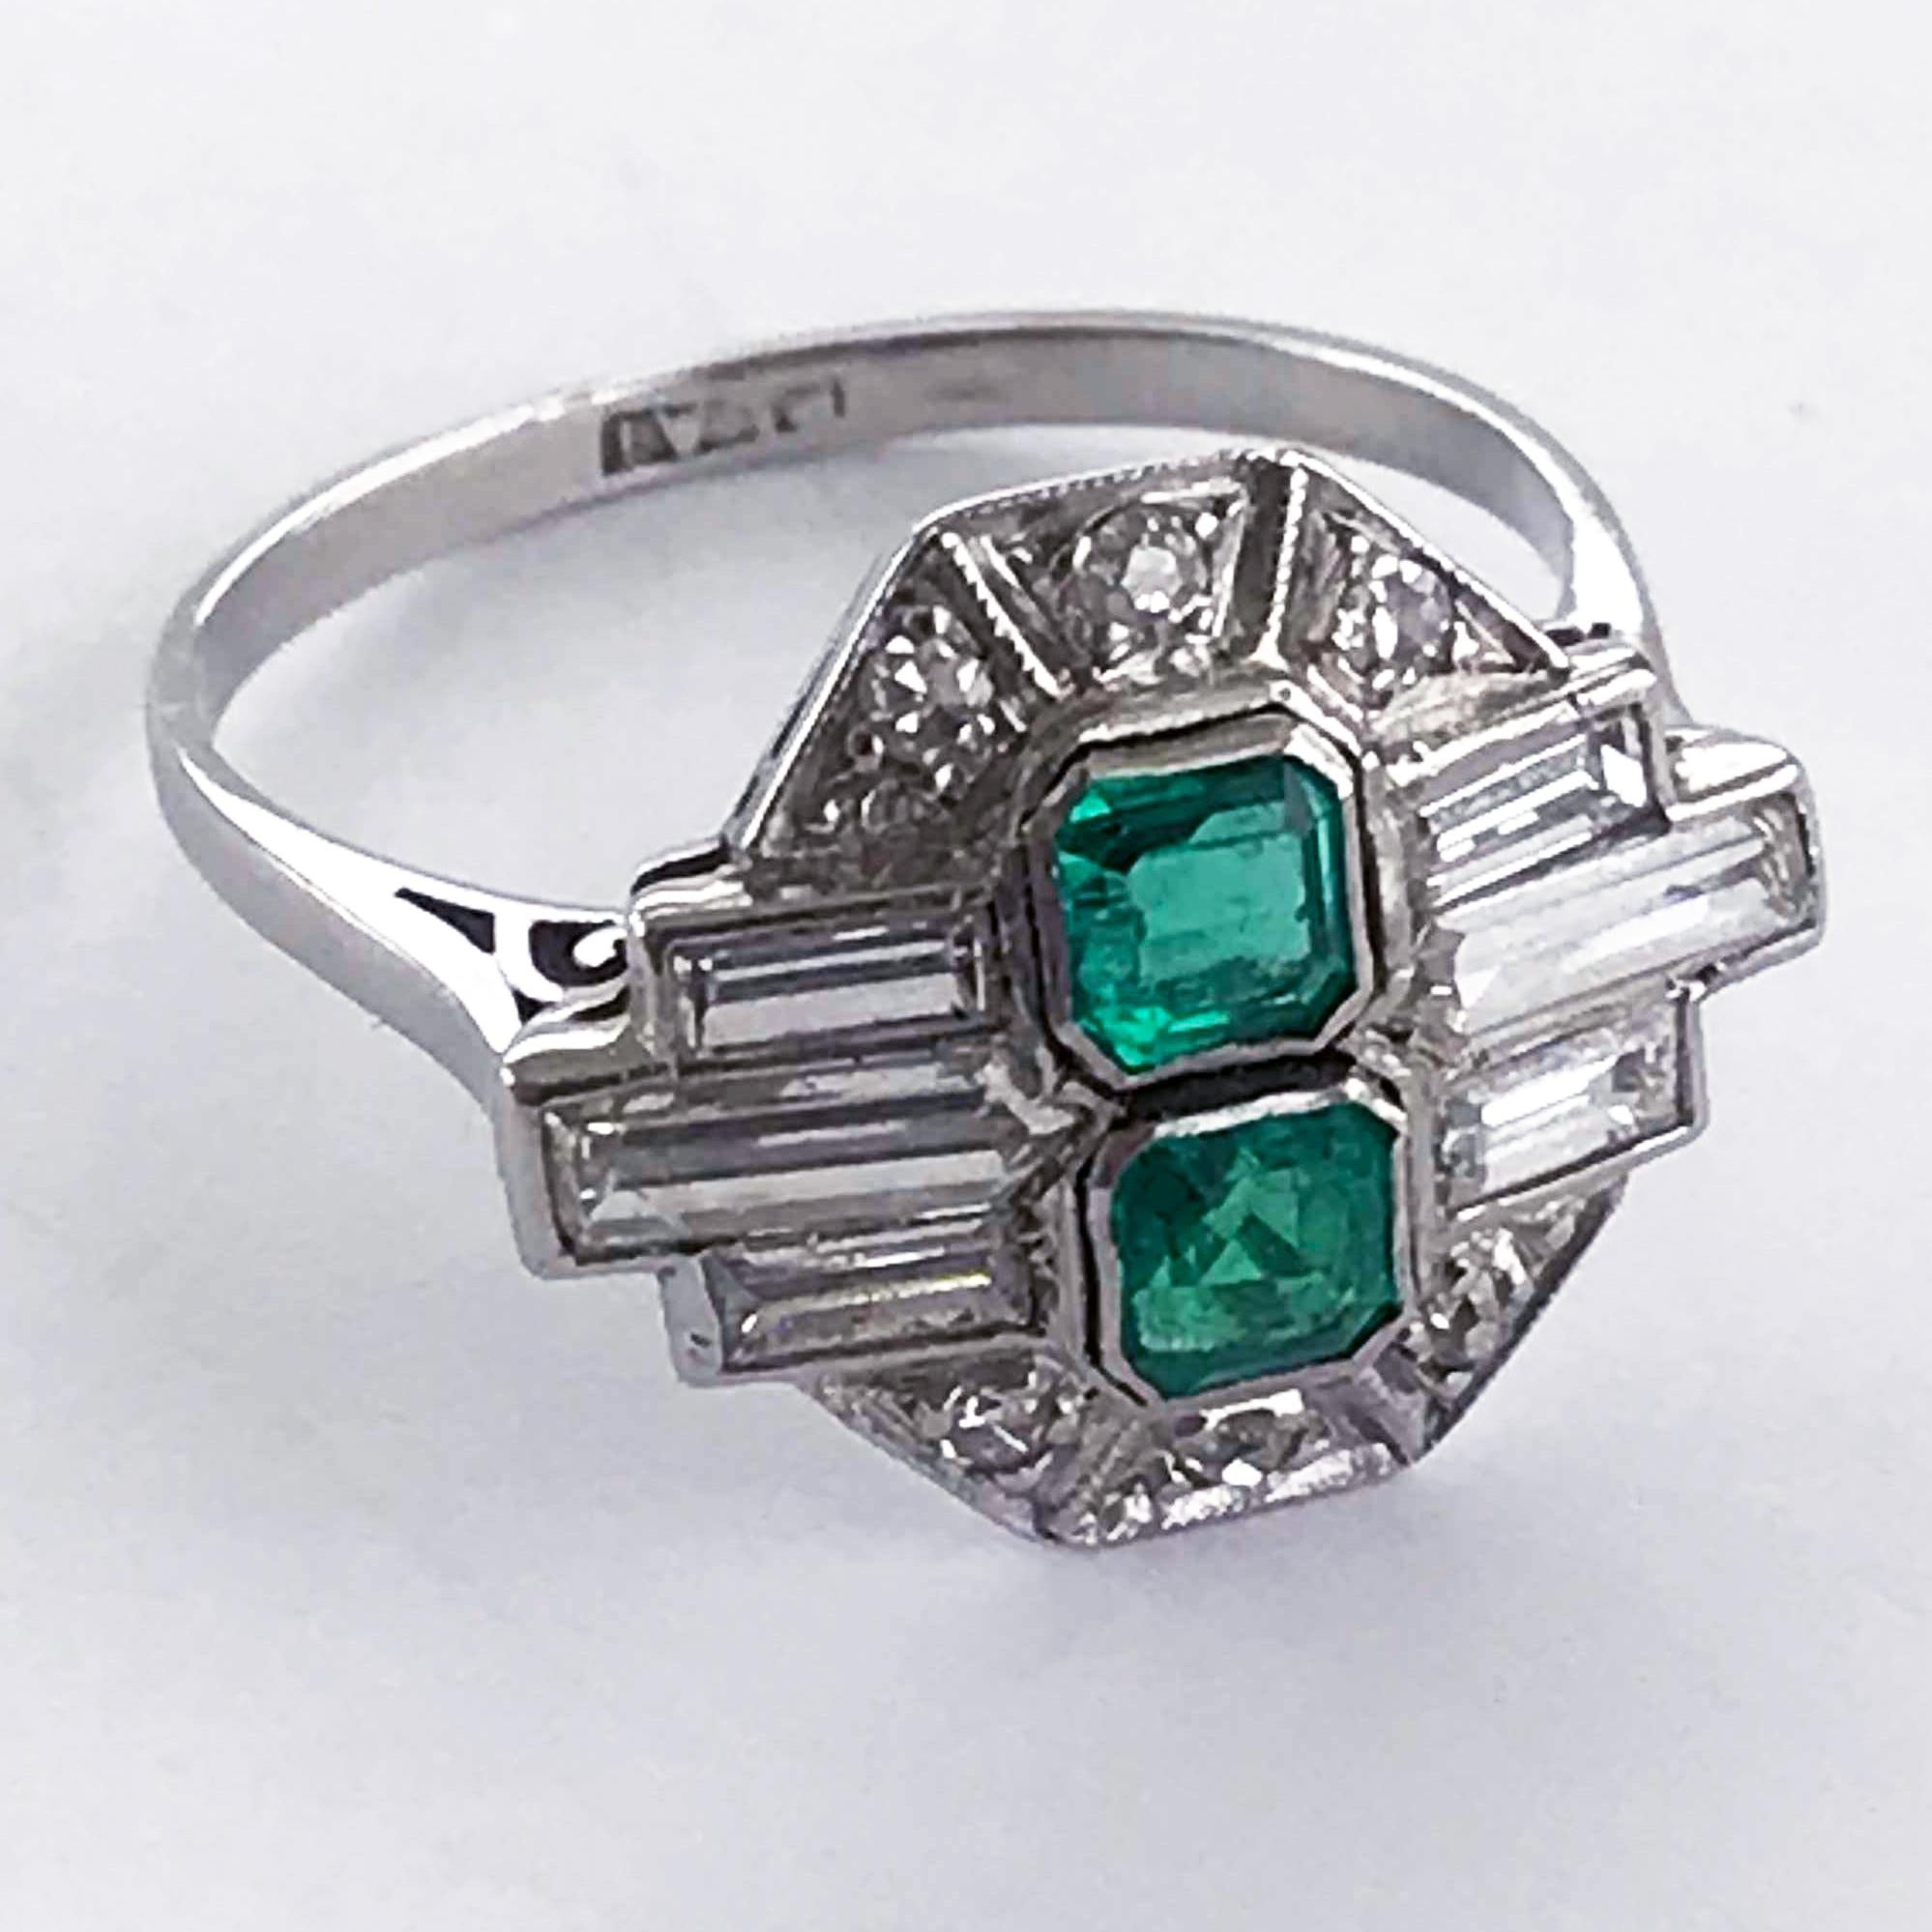 Platinum Art Deco Emerald and Diamond, vintage ring, handmade in England circa 1920.

Central emeralds 0.70 carats (total), Columbian, natural untreated colour with very minor inclusions. 

The emeralds surrounded by differing cuts of diamonds